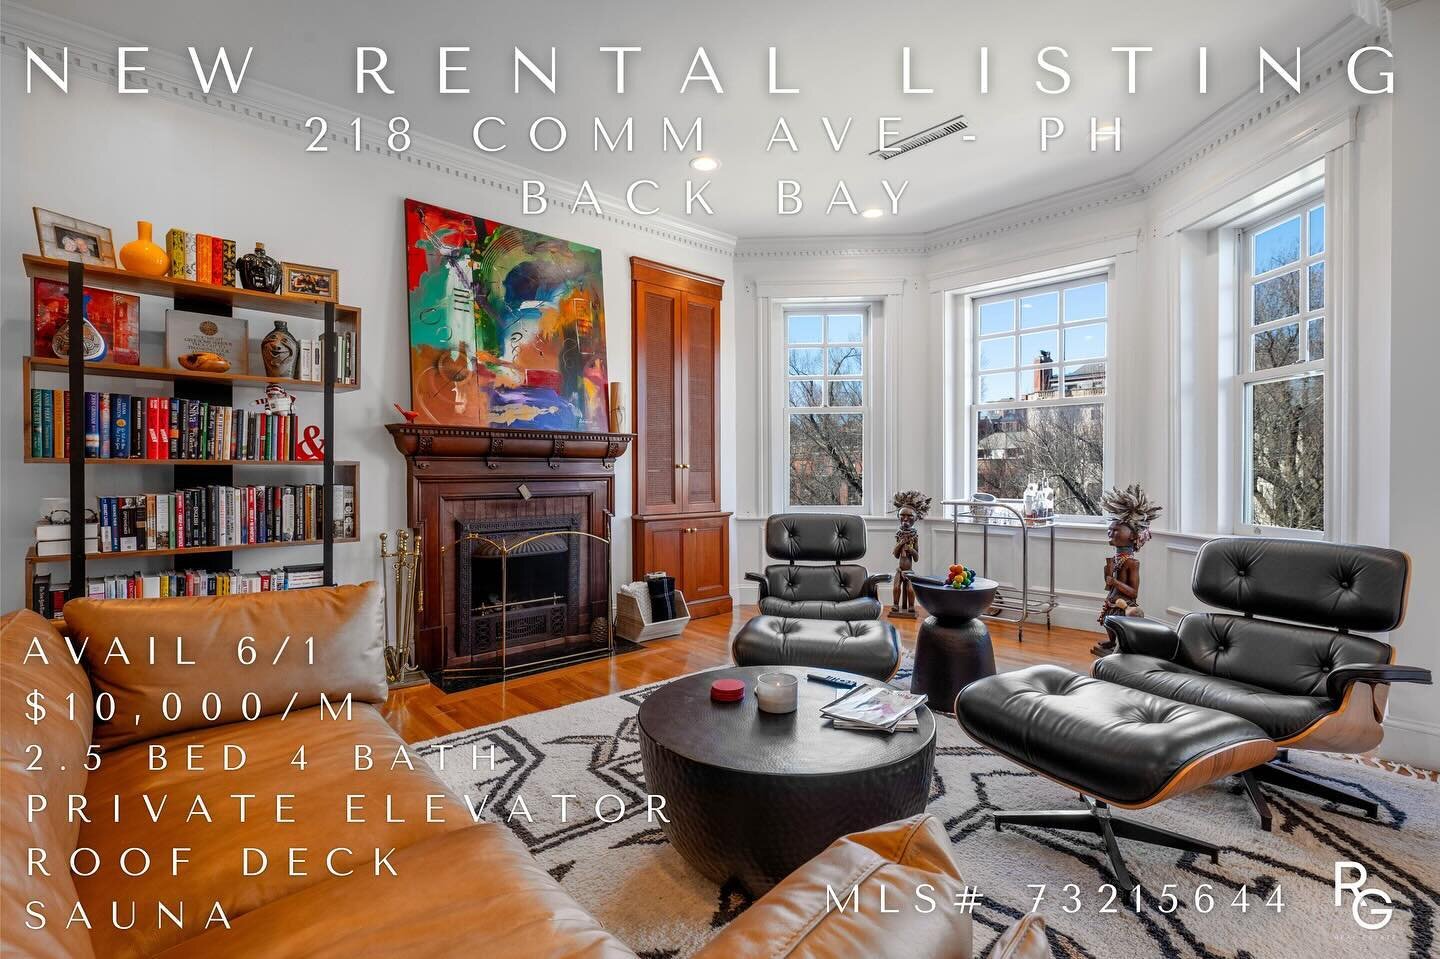 New Rental Listing! 

218 Commonwealth Avenue : Penthouse
Back Bay

MLS #73215644

Available 6/1
$10,000/month 
2.5 Beds 4 Full Baths 
Private elevator 
Roof deck 
Roof Sauna 
Parking space 

Welcome to 218 Commonwealth Ave Penthouse, where timeless 